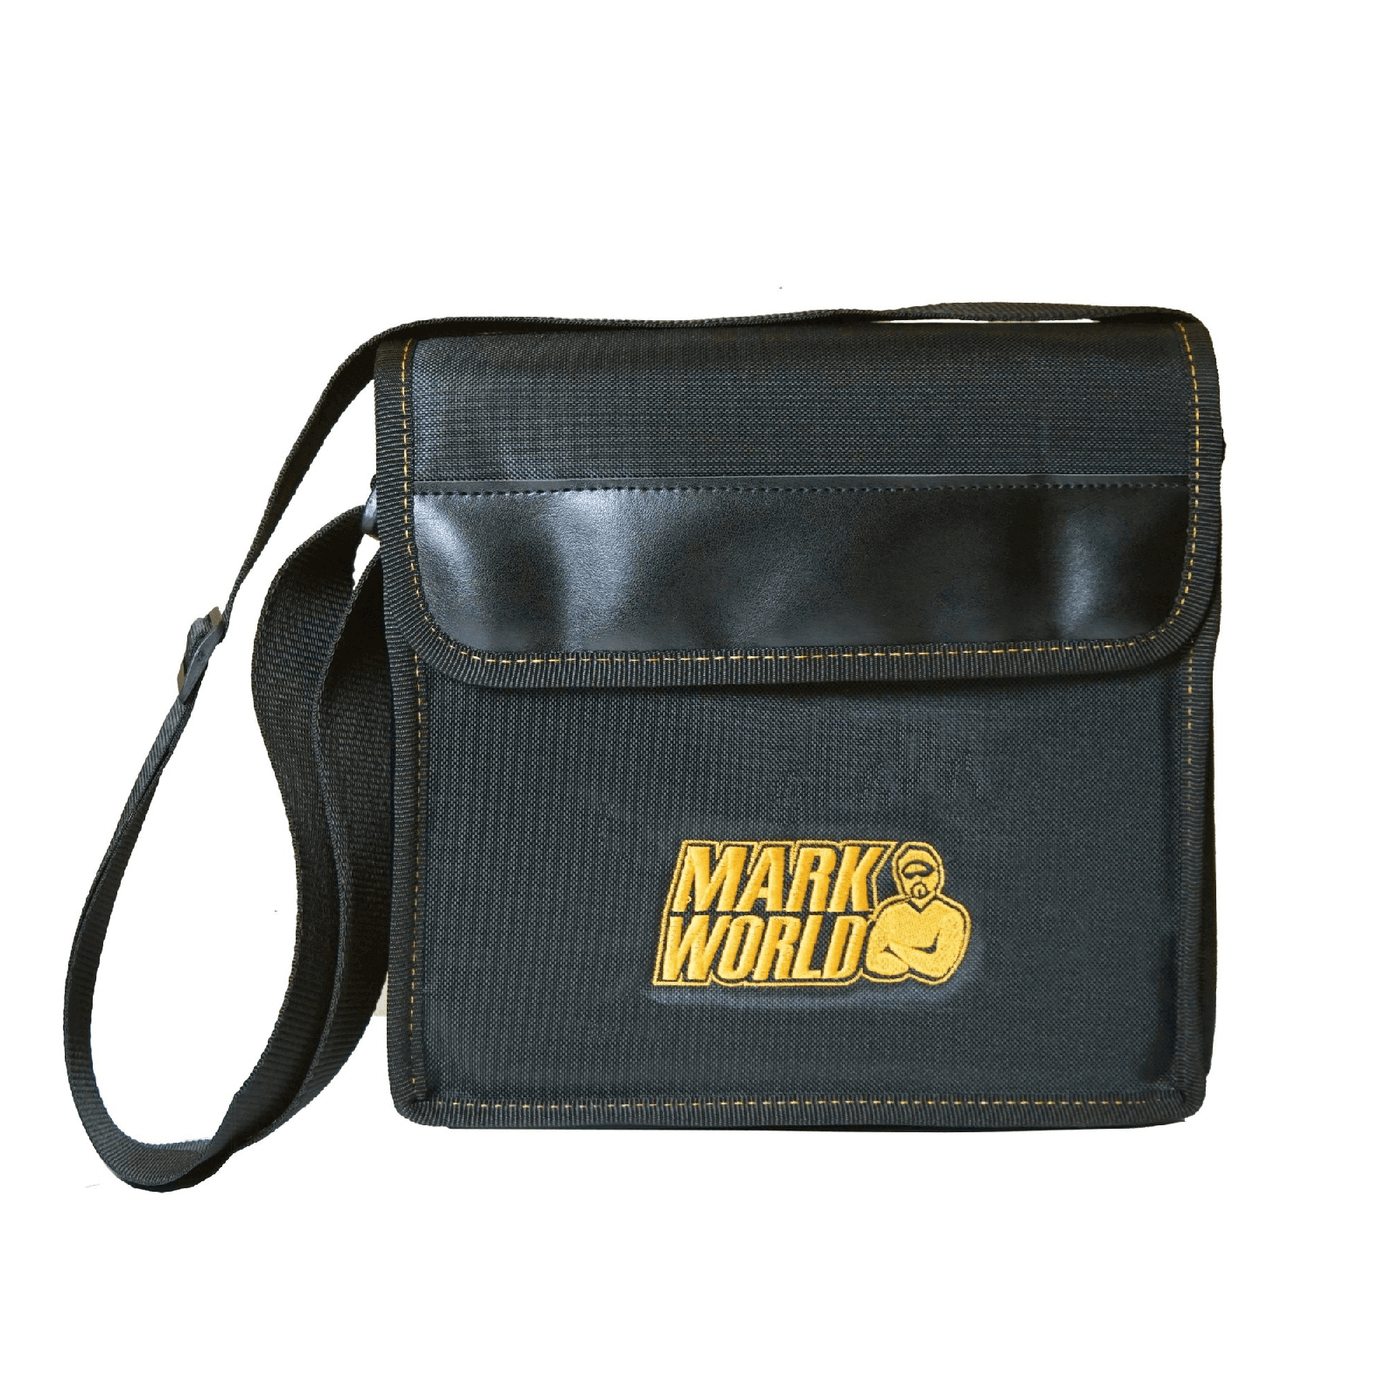 Fundas Markbass Nano Mark 300 - The MARKWORLD BAG XS is a gig bag dedicated to the NANO MARK 300 head and it features a zipped pocket to fit cable and accessories on the back. - SlapStore América Latina especialistas en Bajos de Chile a todo América Latin